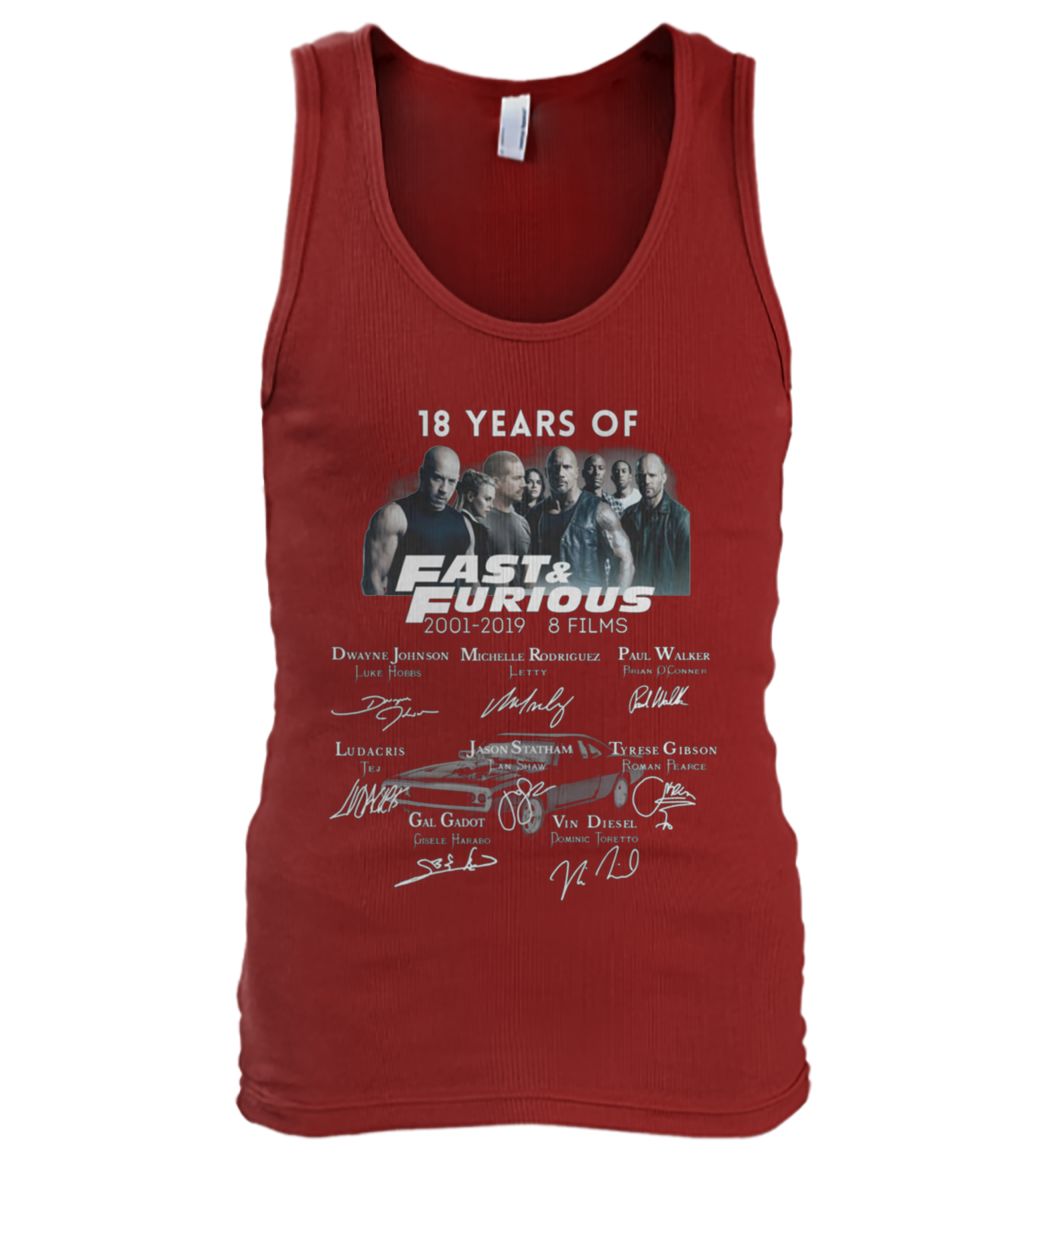 18 years of fast and furious 2001 2019 8 films men's tank top